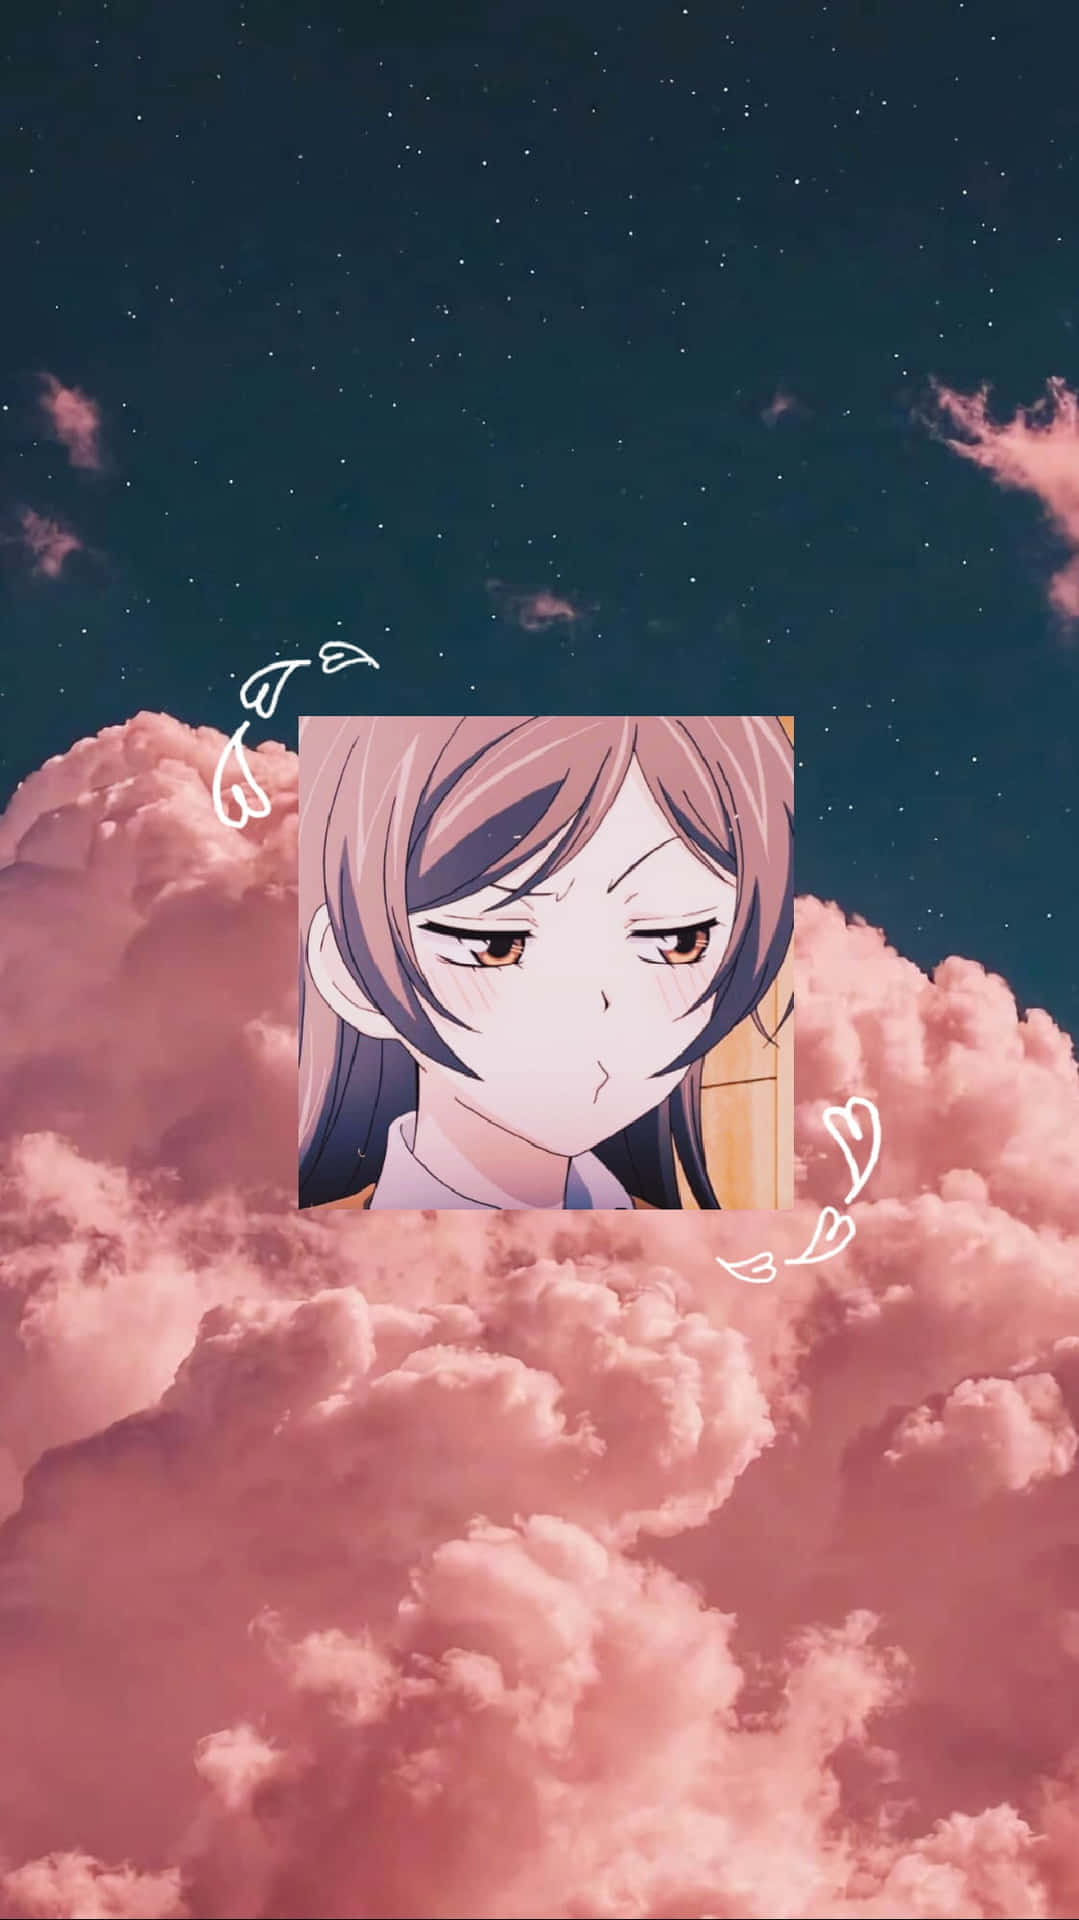 Anime Girl Clouds Starry Sky Aesthetic Wallpaper